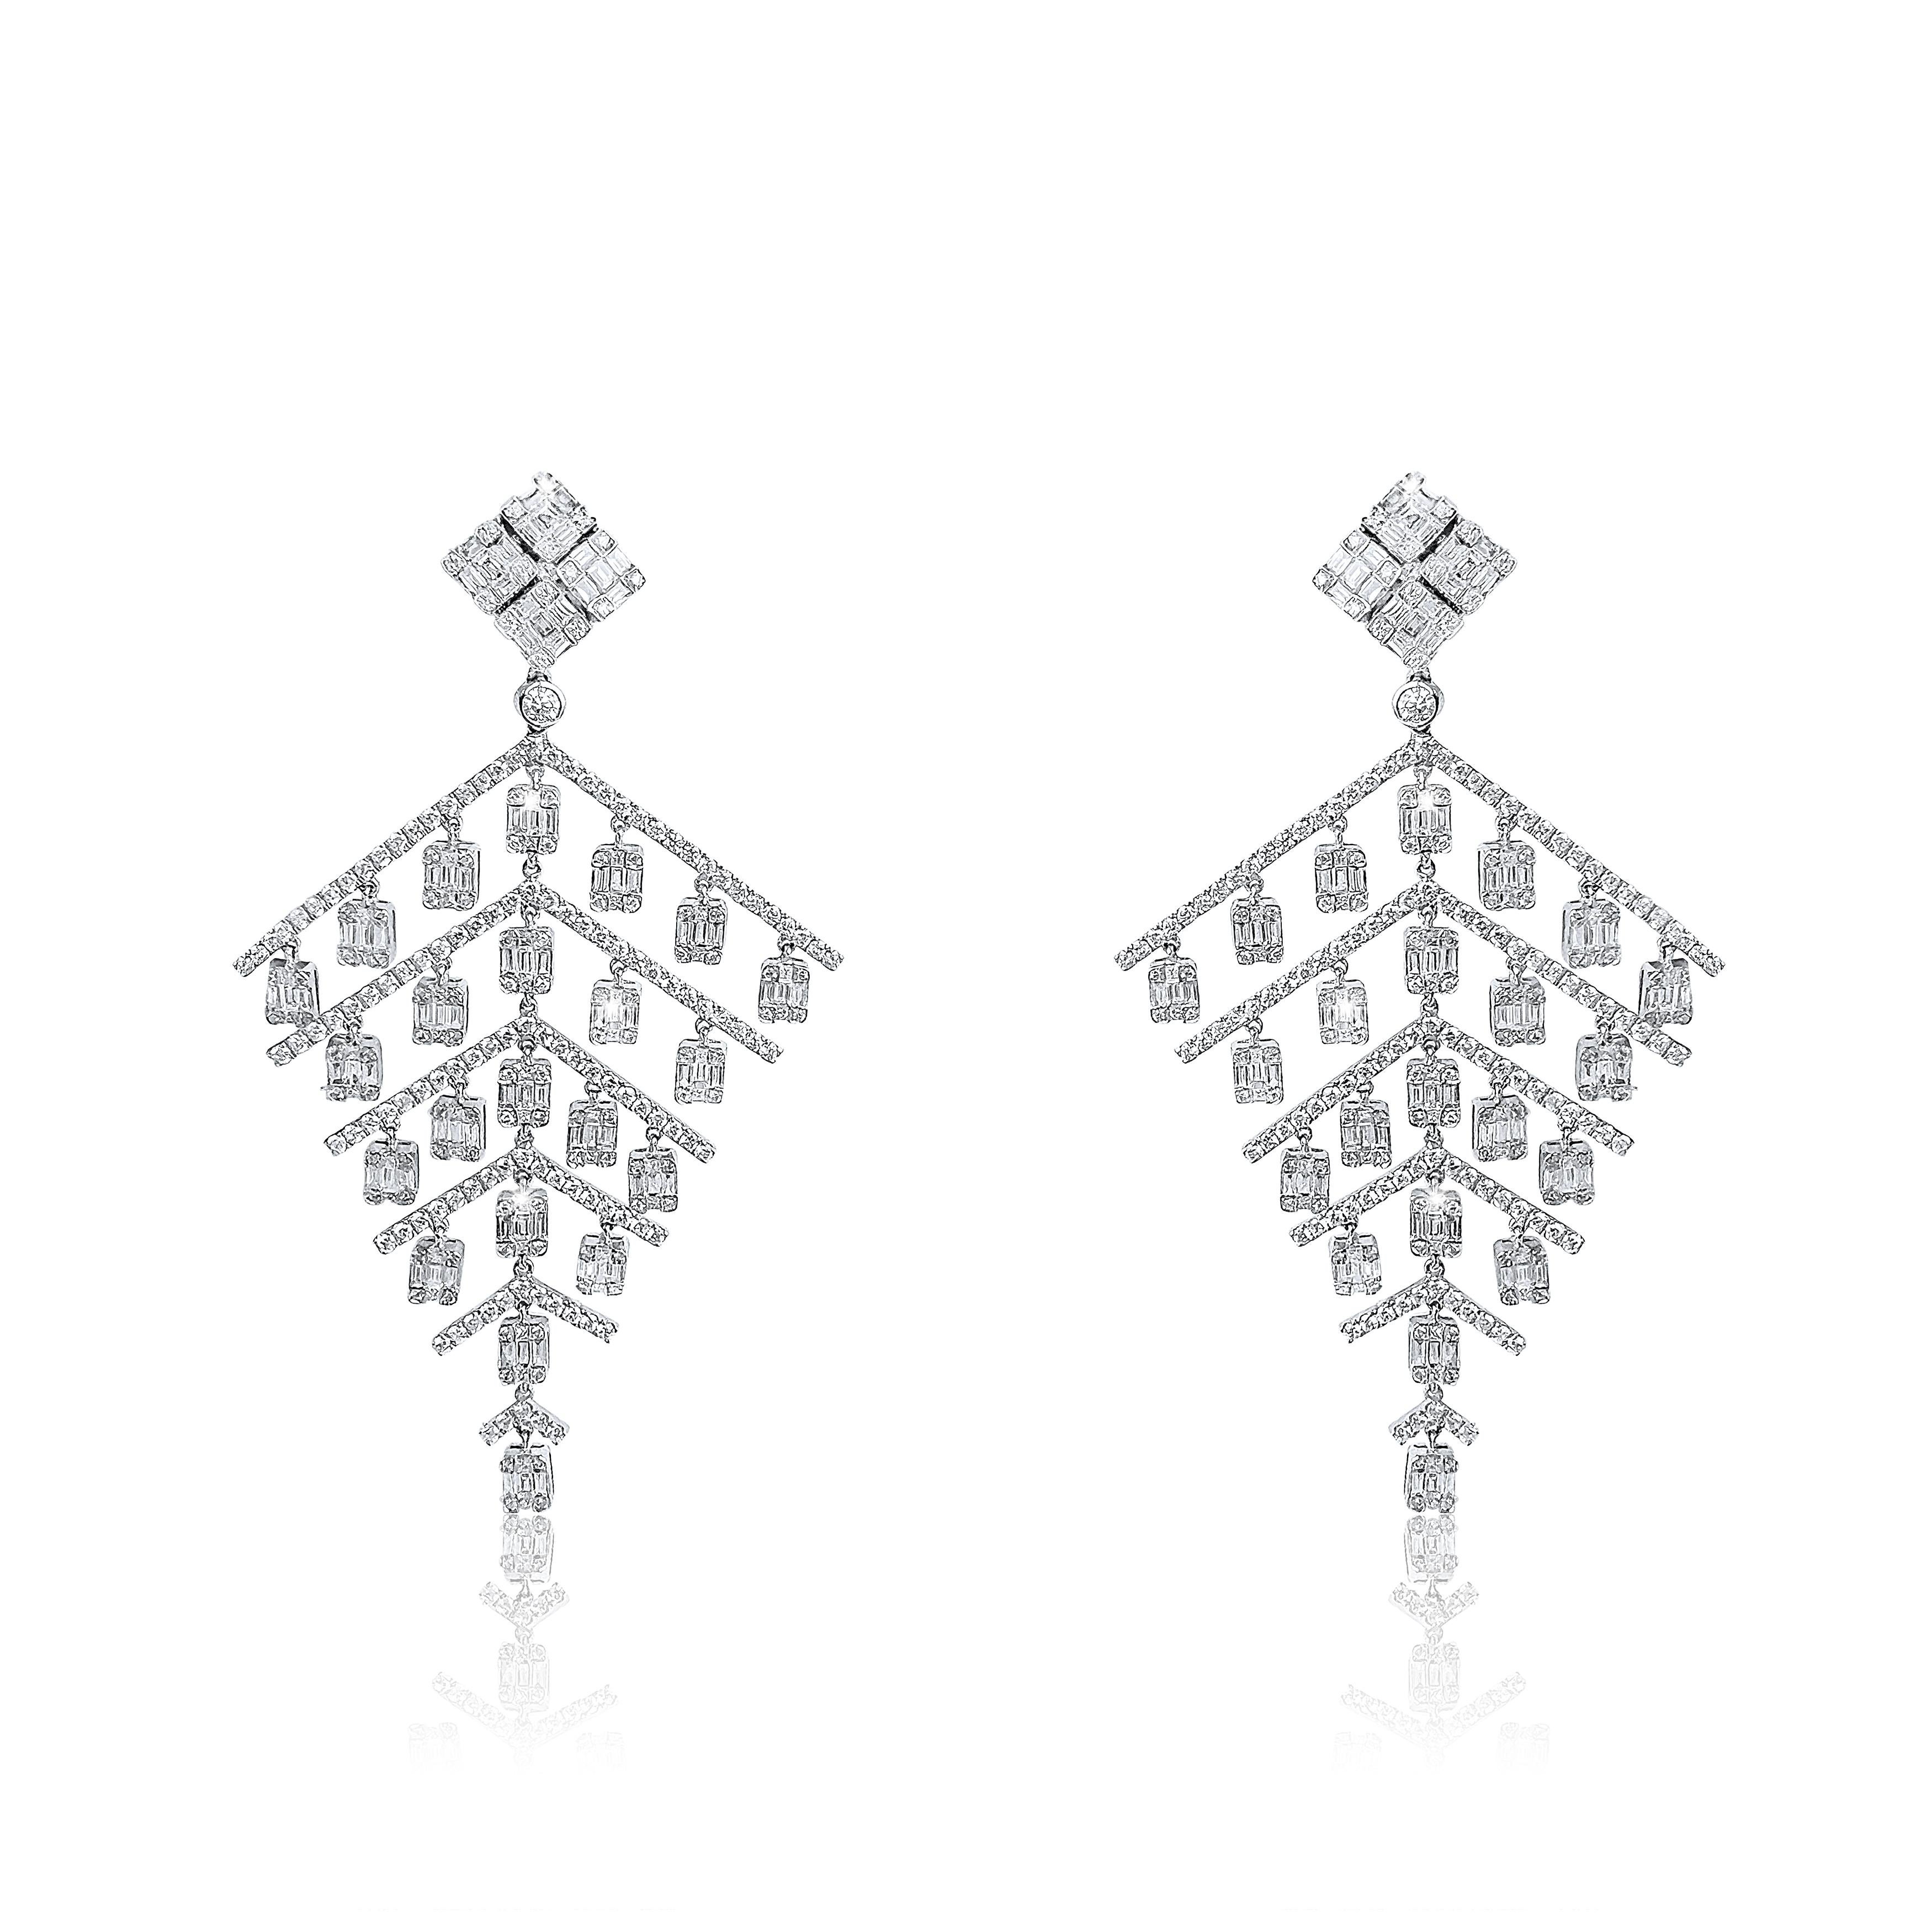 Earring Information
Metal Purity : 18K
Color : White Gold
Gold Weight : 19.58g
Length : 3.25''
Diamond Count : 454 Round Diamonds
Round Diamond Carat Weight : 3.94 ttcw
Baguette Diamonds Count : 172 
Baguette Diamonds Carat Weight : 3.67 ttcw
Serial